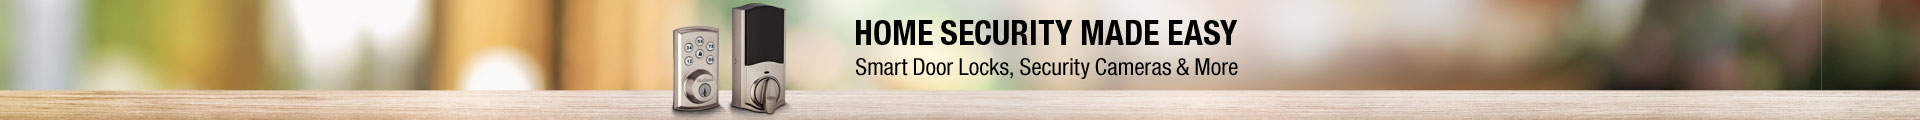 Home security made easy